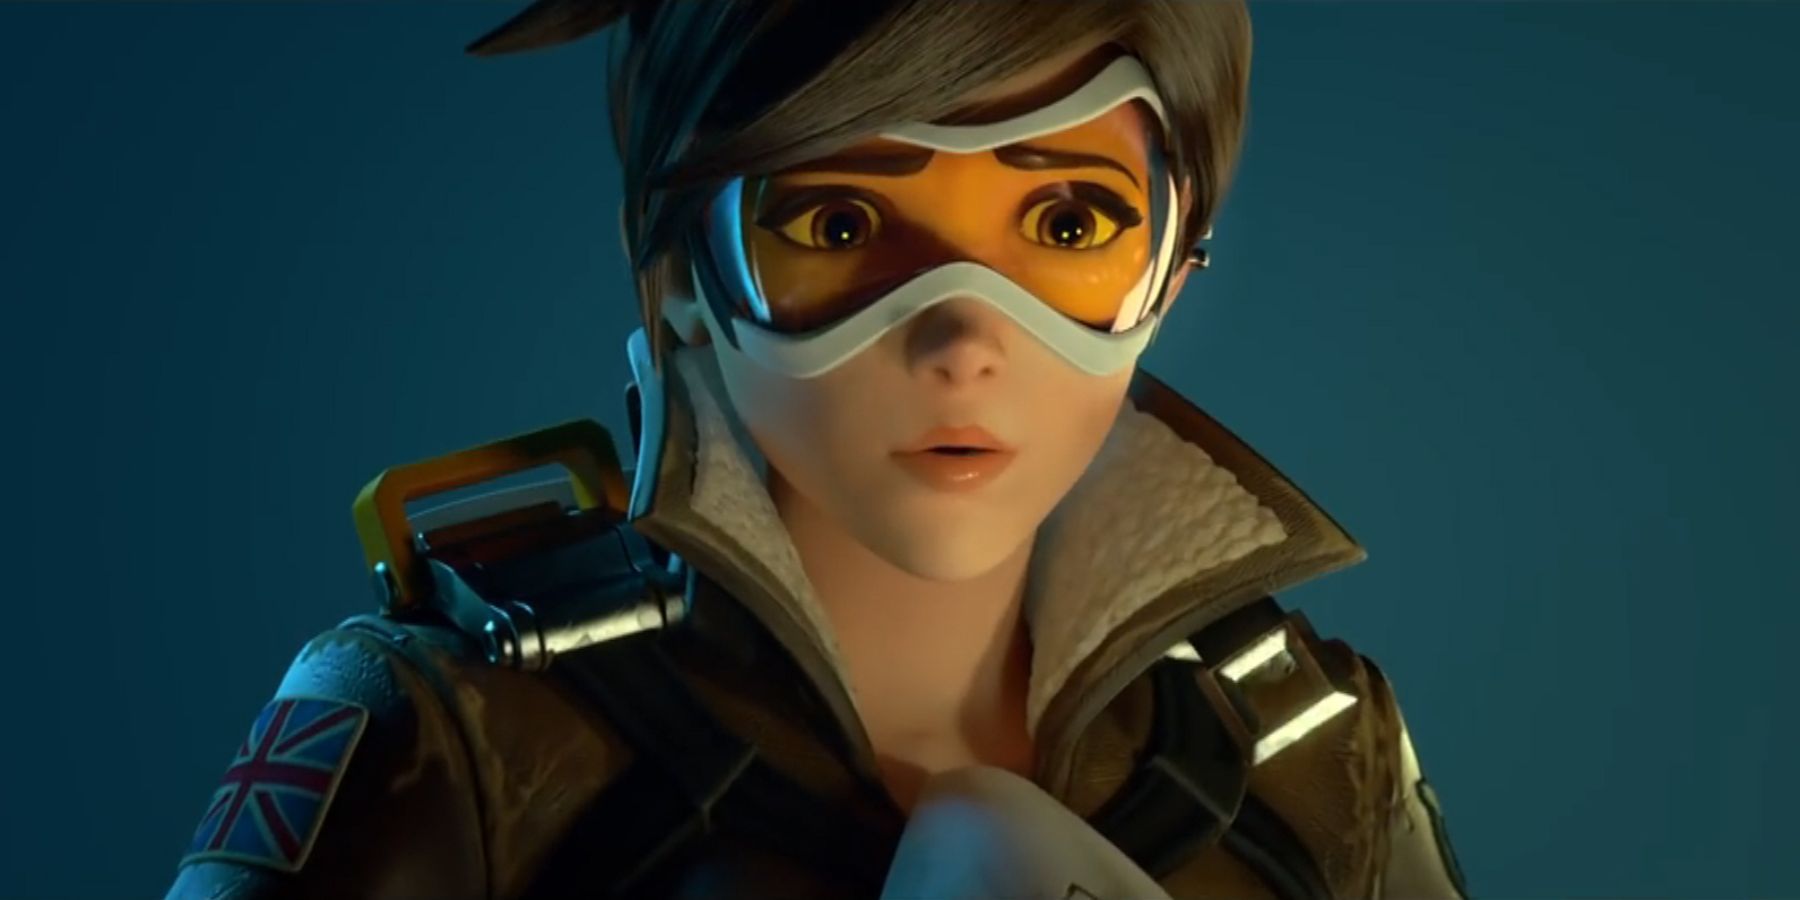 Does Tracer Age?  Overwatch Lore #shorts #overwatch2 